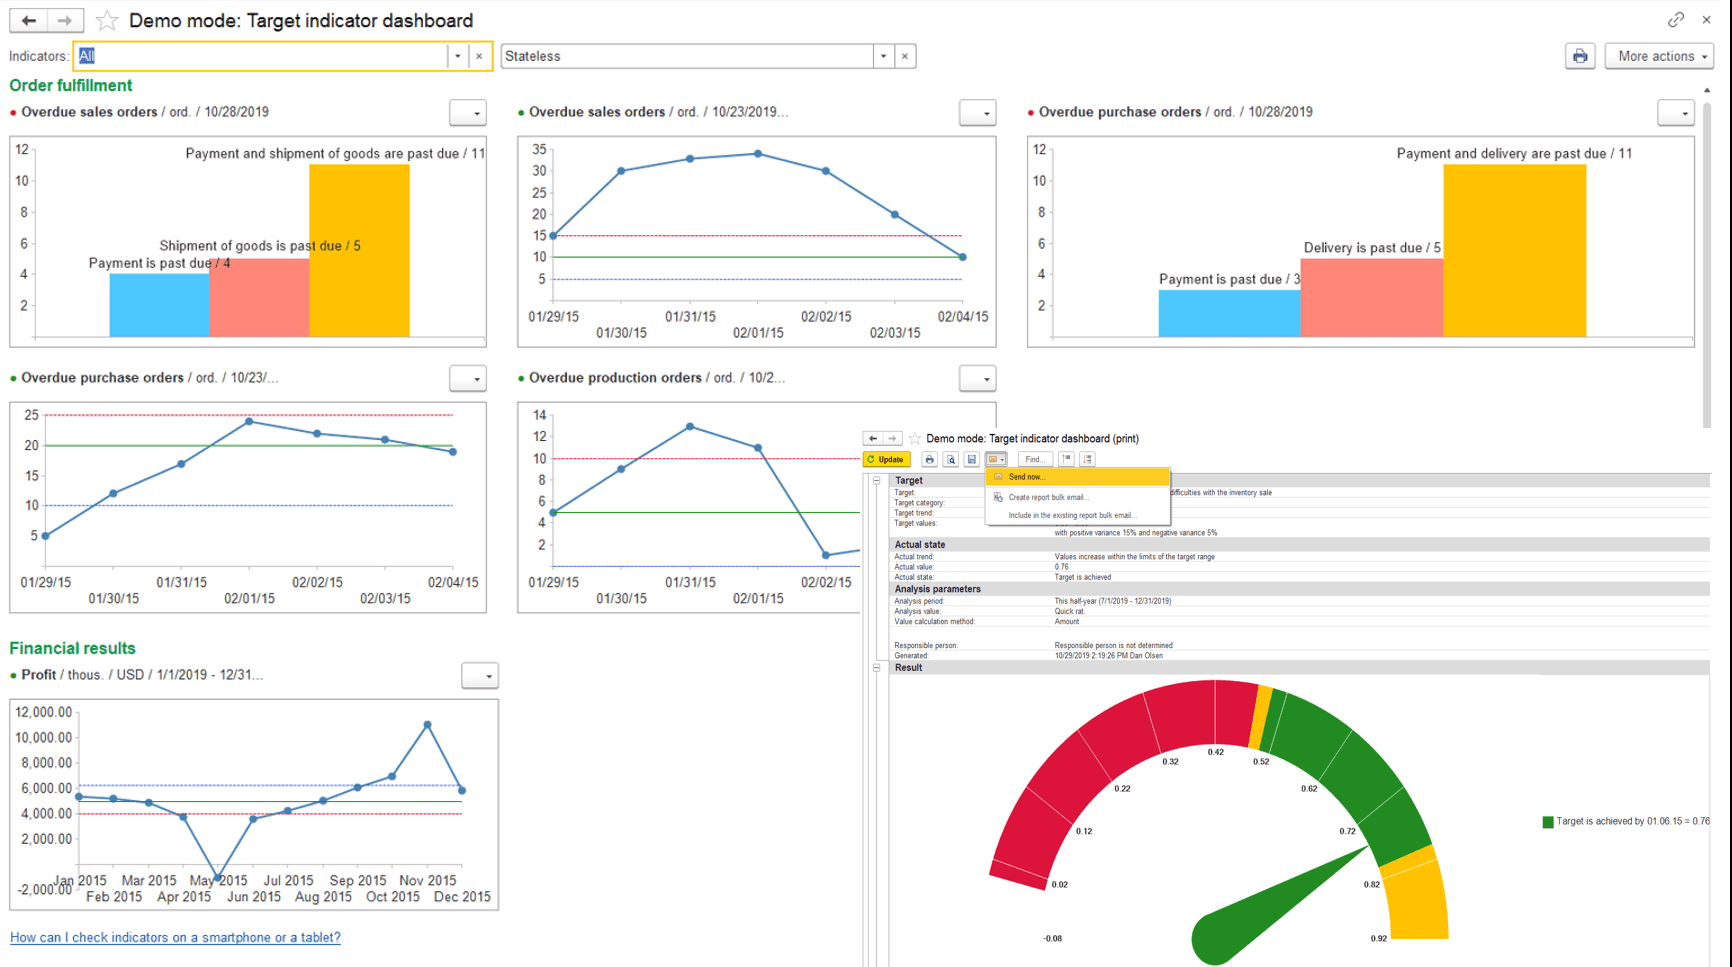 Monitoring and analysis of the business indicators